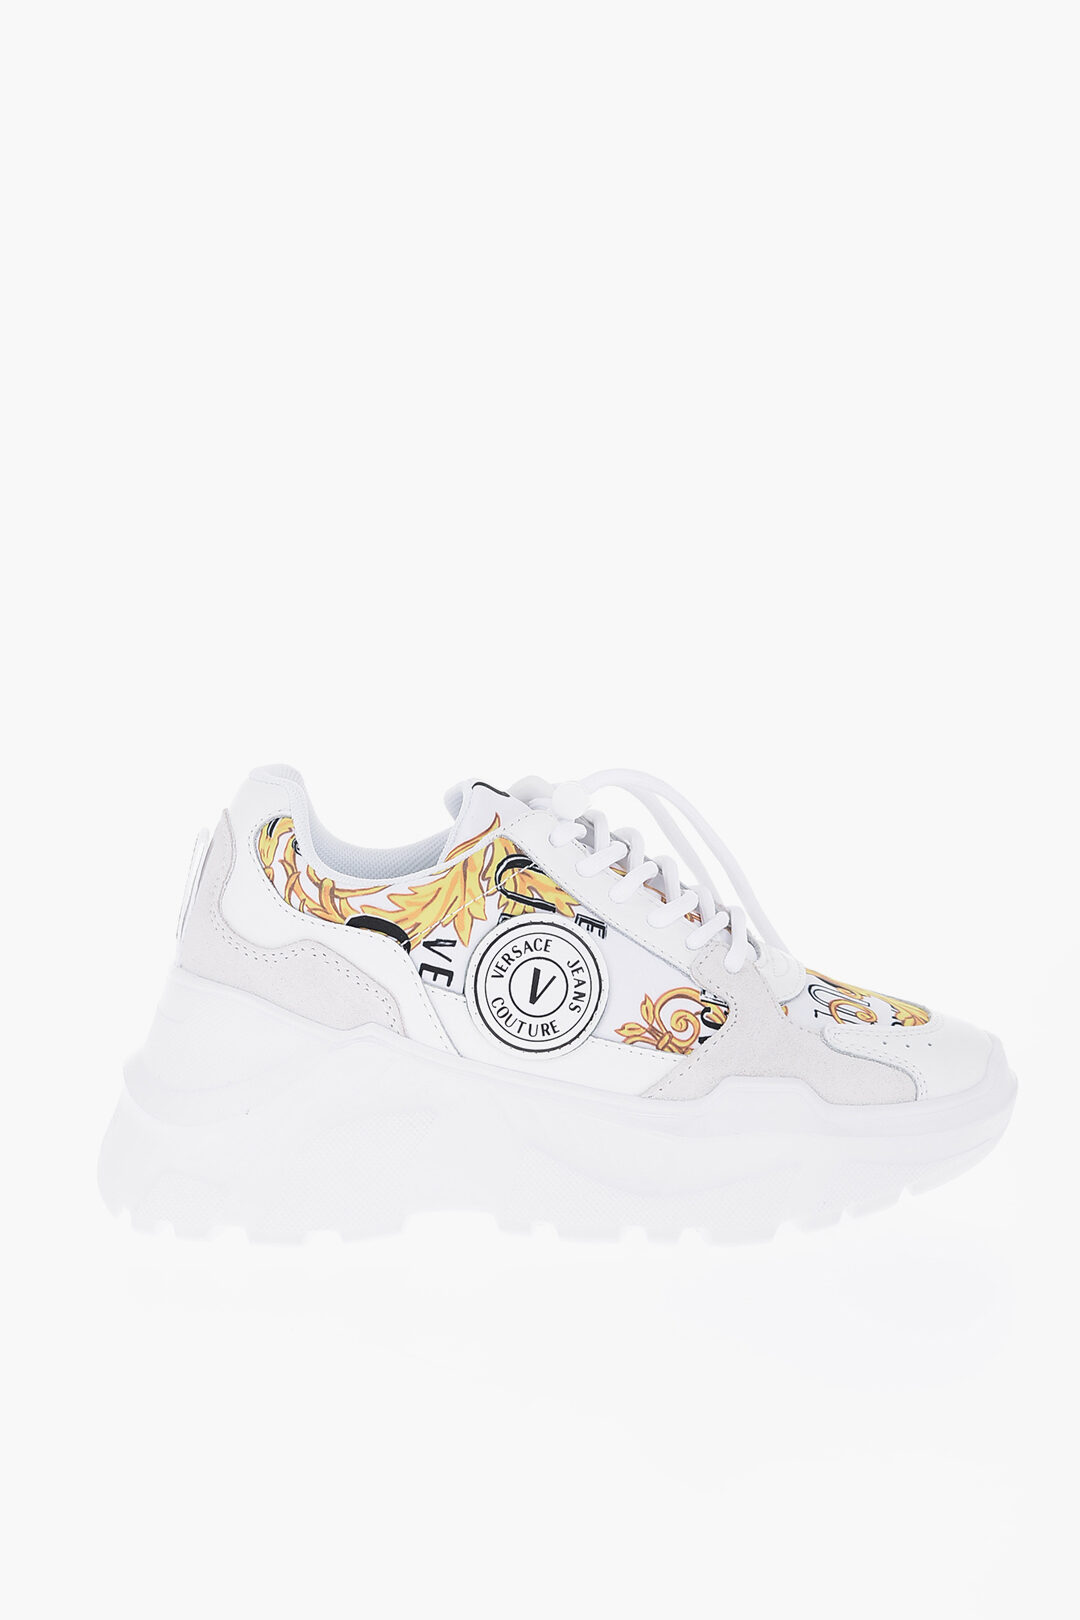 Versace Women's White Canvas Leather Logo Sneakers Shoes | eBay